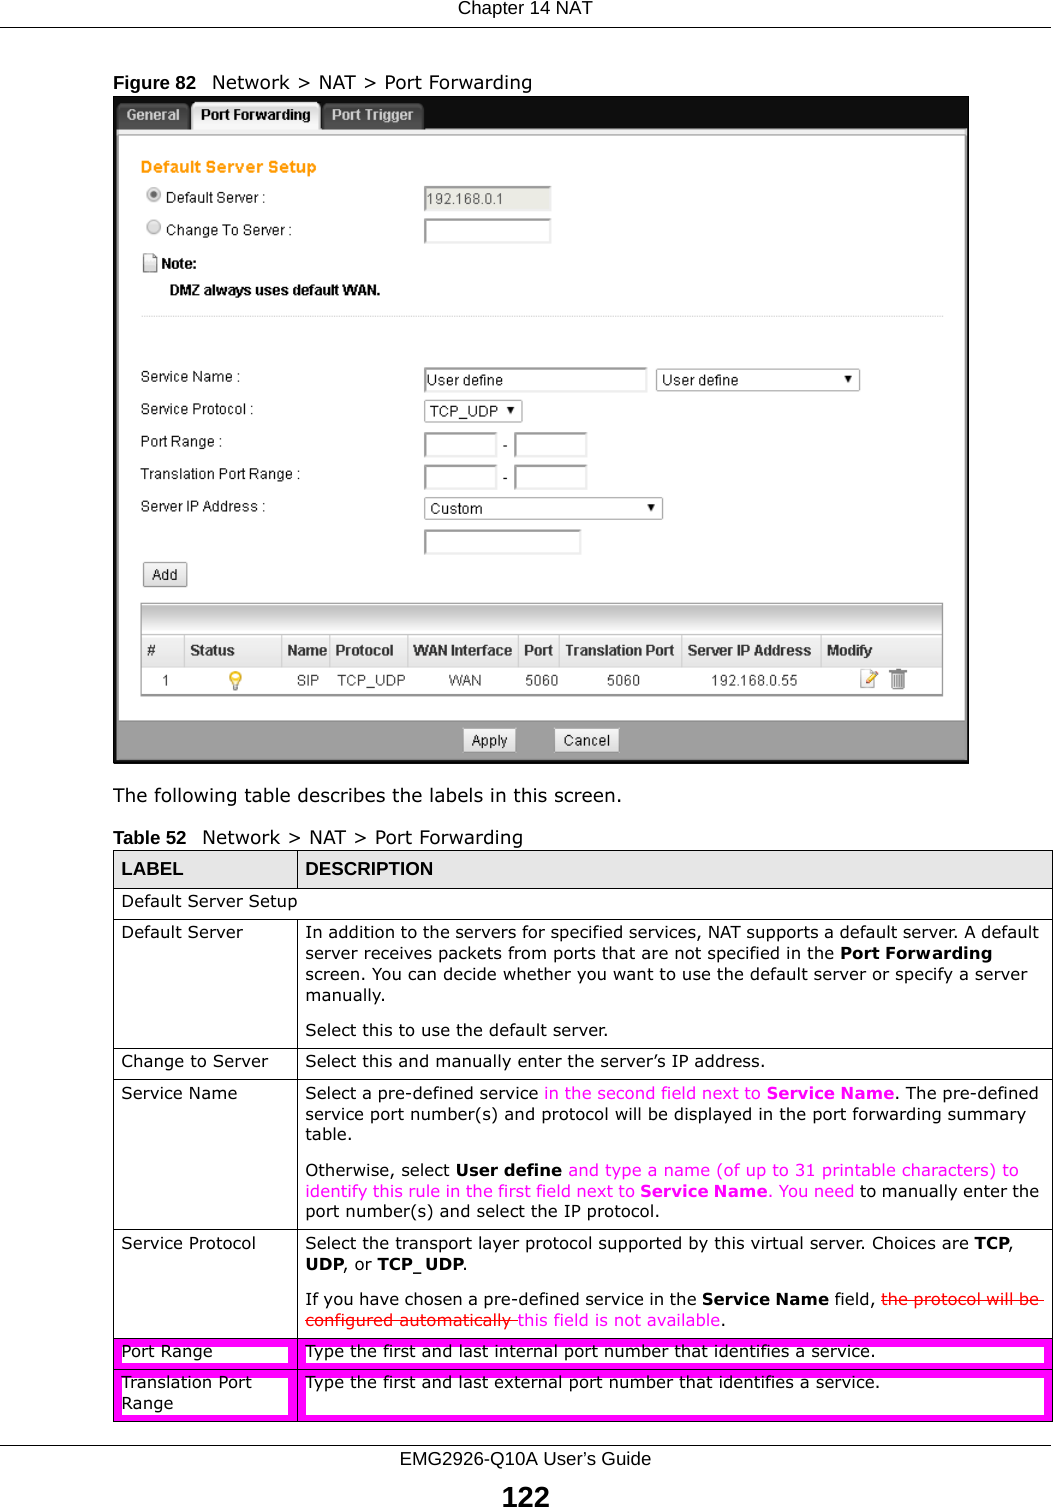 Chapter 14 NATEMG2926-Q10A User’s Guide122Figure 82   Network &gt; NAT &gt; Port Forwarding The following table describes the labels in this screen.Table 52   Network &gt; NAT &gt; Port ForwardingLABEL DESCRIPTIONDefault Server SetupDefault Server In addition to the servers for specified services, NAT supports a default server. A default server receives packets from ports that are not specified in the Port Forwarding screen. You can decide whether you want to use the default server or specify a server manually.Select this to use the default server. Change to Server Select this and manually enter the server’s IP address.Service Name Select a pre-defined service in the second field next to Service Name. The pre-defined service port number(s) and protocol will be displayed in the port forwarding summary table.Otherwise, select User define and type a name (of up to 31 printable characters) to identify this rule in the first field next to Service Name. You need to manually enter the port number(s) and select the IP protocol.Service Protocol Select the transport layer protocol supported by this virtual server. Choices are TCP, UDP, or TCP_UDP. If you have chosen a pre-defined service in the Service Name field, the protocol will be configured automatically this field is not available.Port Range Type the first and last internal port number that identifies a service.Translation Port RangeType the first and last external port number that identifies a service.